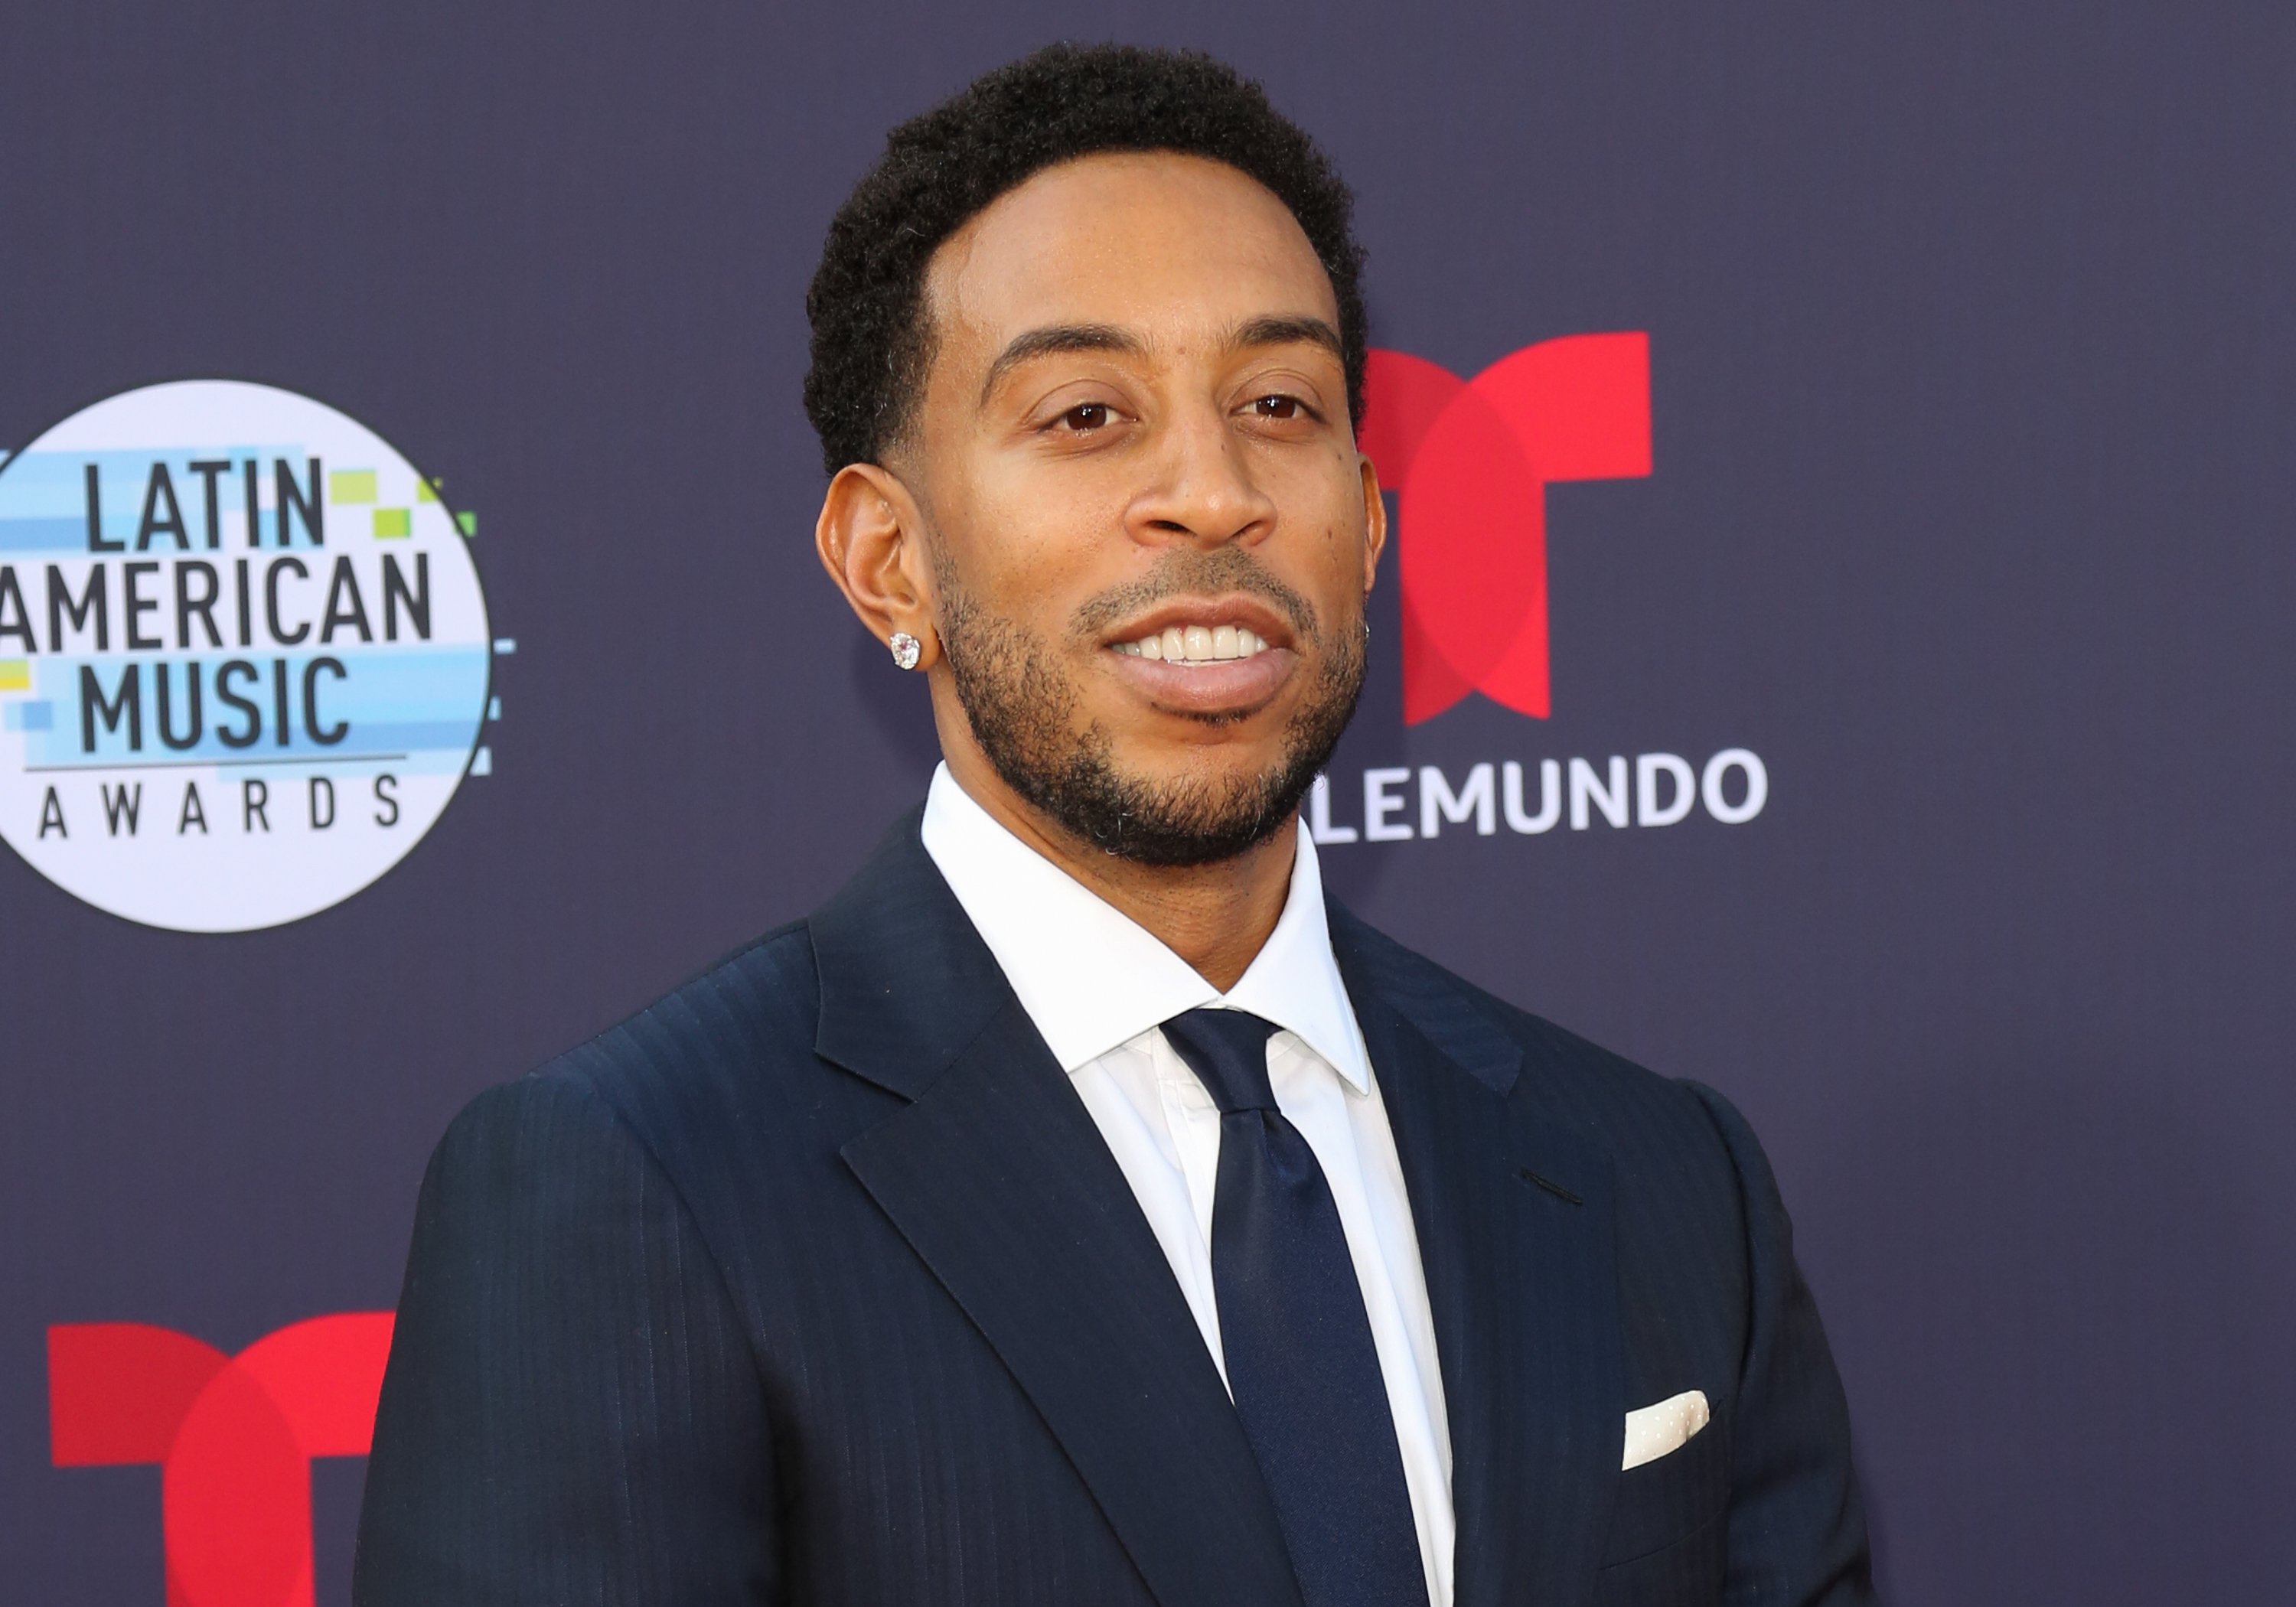 Actor Ludacris attends the 2018 Latin American Music Awards at Dolby Theatre in Hollywood on October 25, 2018. | Photo: Getty Images